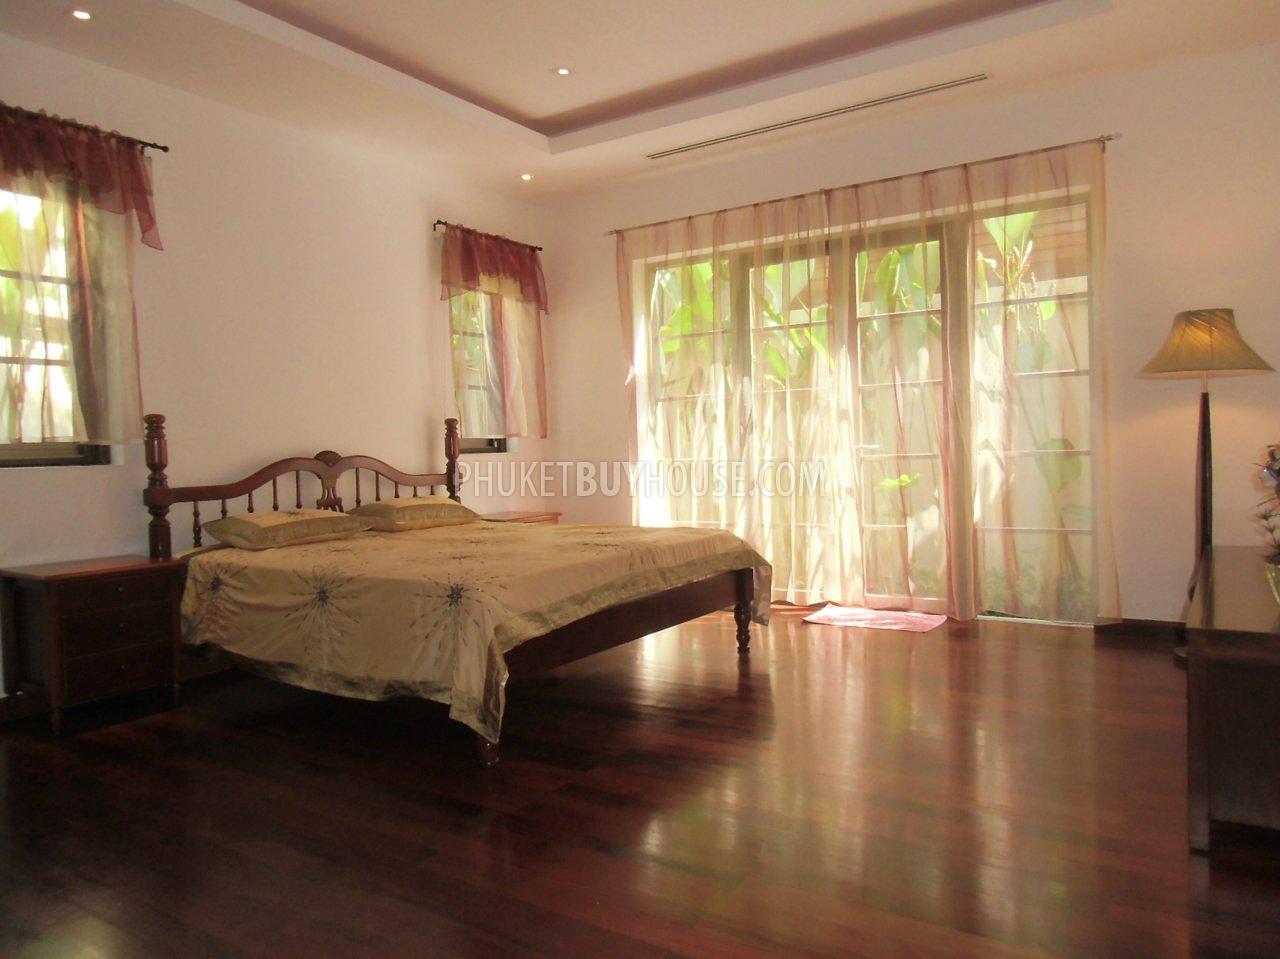 BAN2907: Lovely Villa with 3 Bedroom in walking distance from the Bang Tao beach. Photo #2